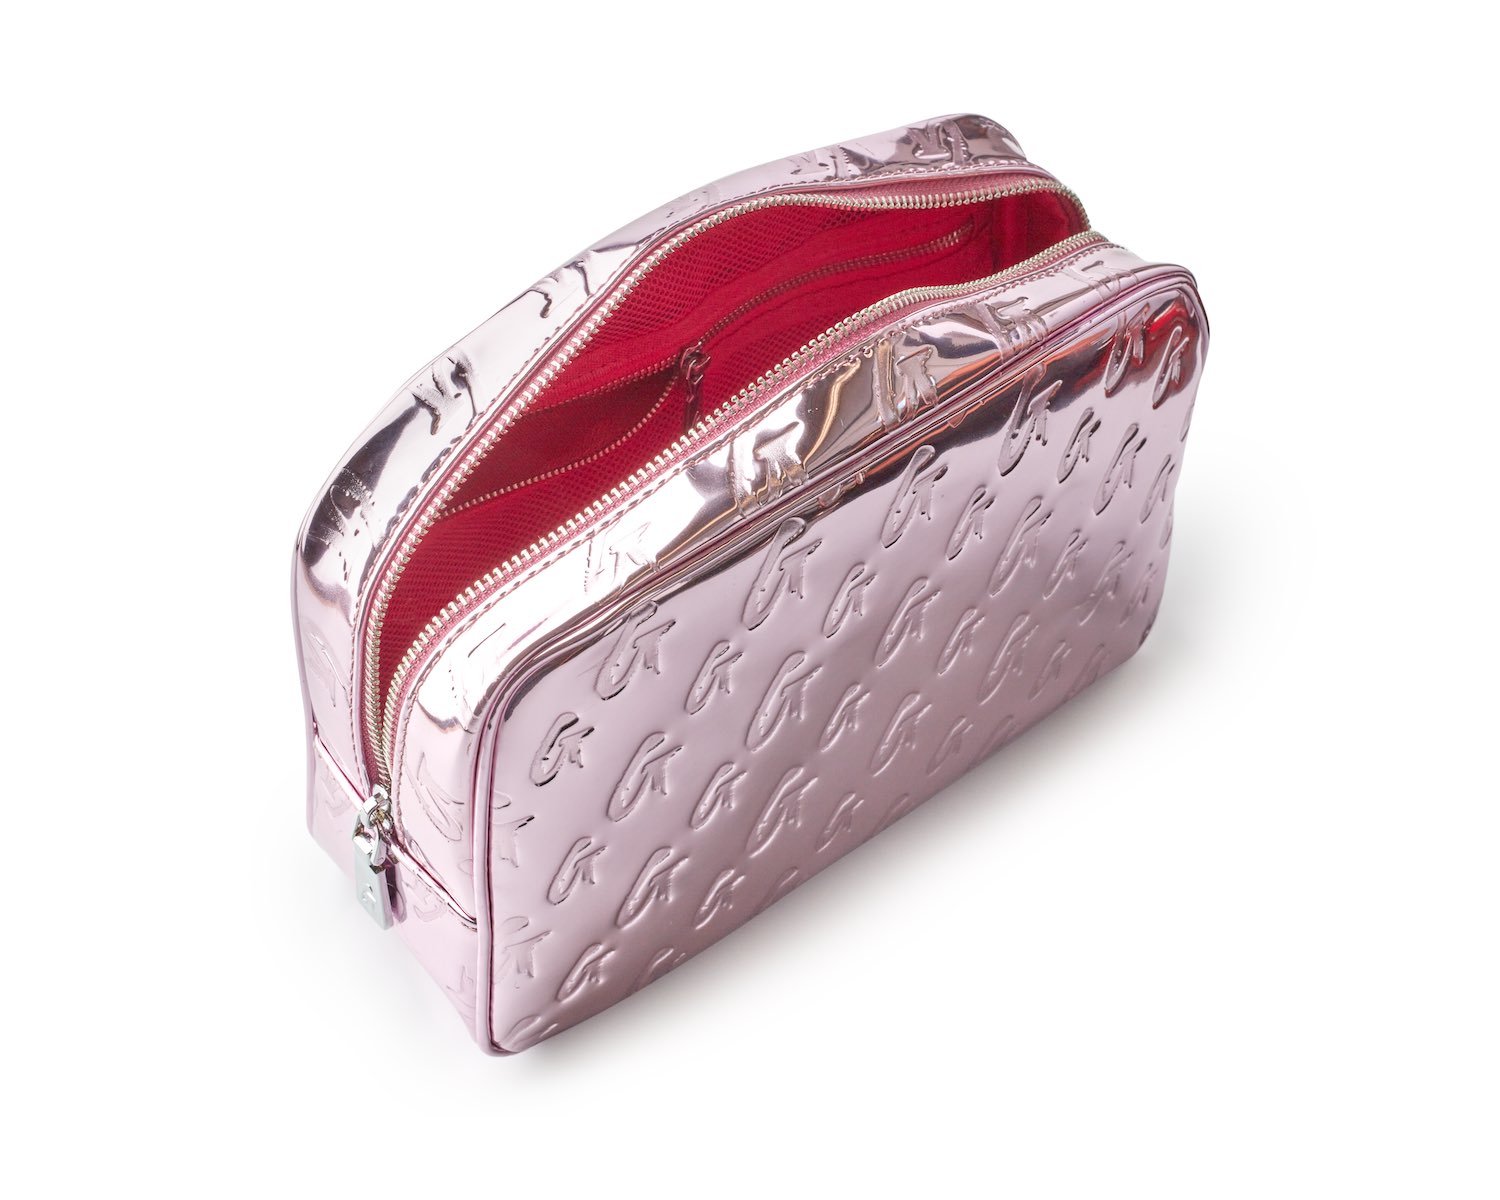 MONOGRAM SMALL COSMETIC TOILETRY BAG MATTE BLACK X PINK – Glam-Aholic  Lifestyle